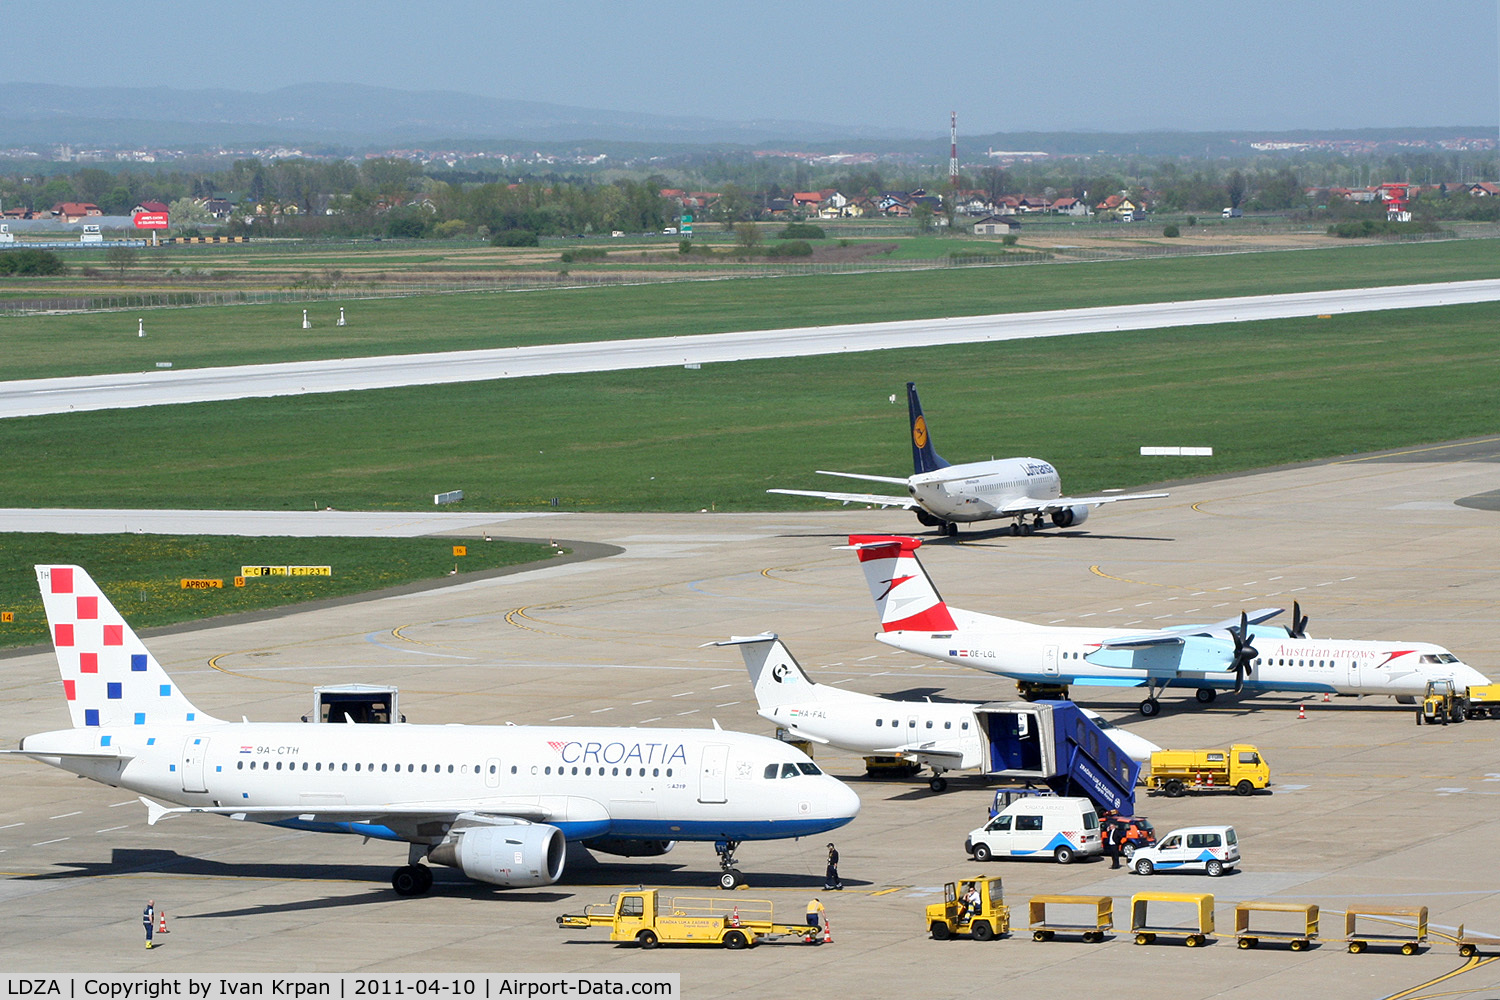 Zagreb Pleso Airport, Zagreb Croatia (LDZA) - Picture shows east side of Zagreb airport platform. Left from DLH Boeing 737 is taxiway C and DLH taxi on taxiway F to the holding point runway 23.